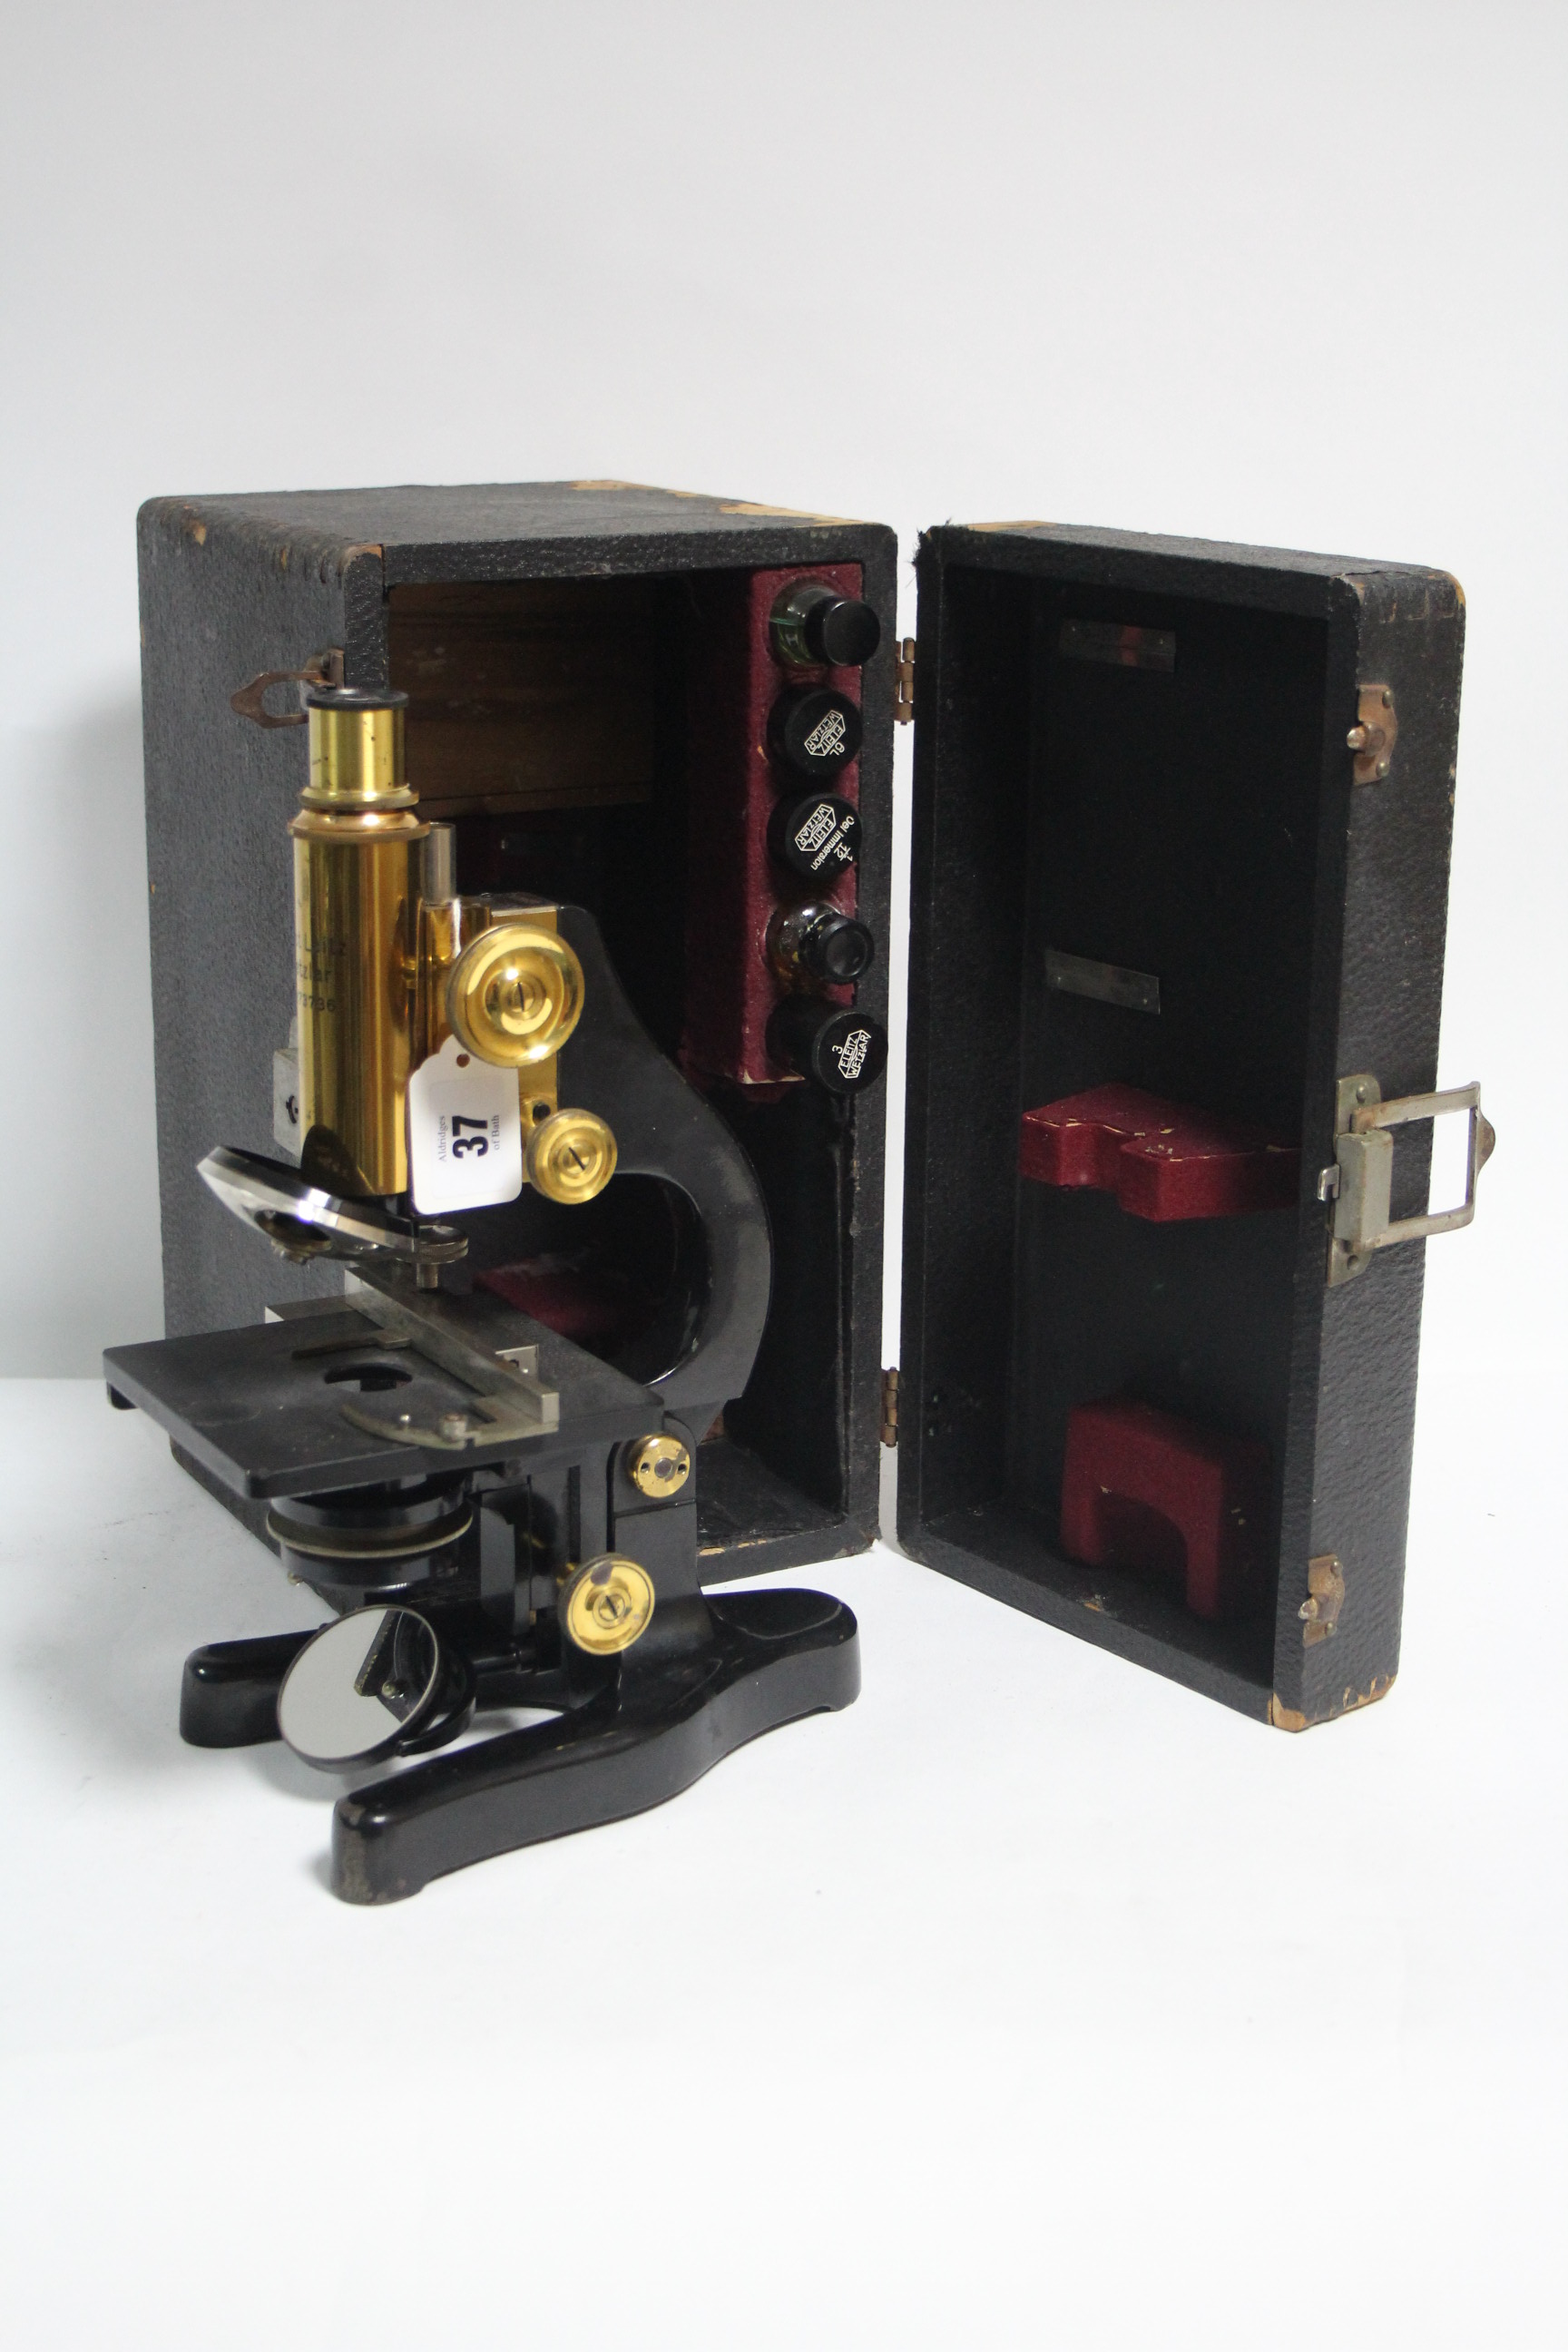 AN ERNST LEITZ WETZLAR BALCK LACQUERED MONOCULAR MICROSCOPE WITH BRASS FITTINGS (No. 27373 6),